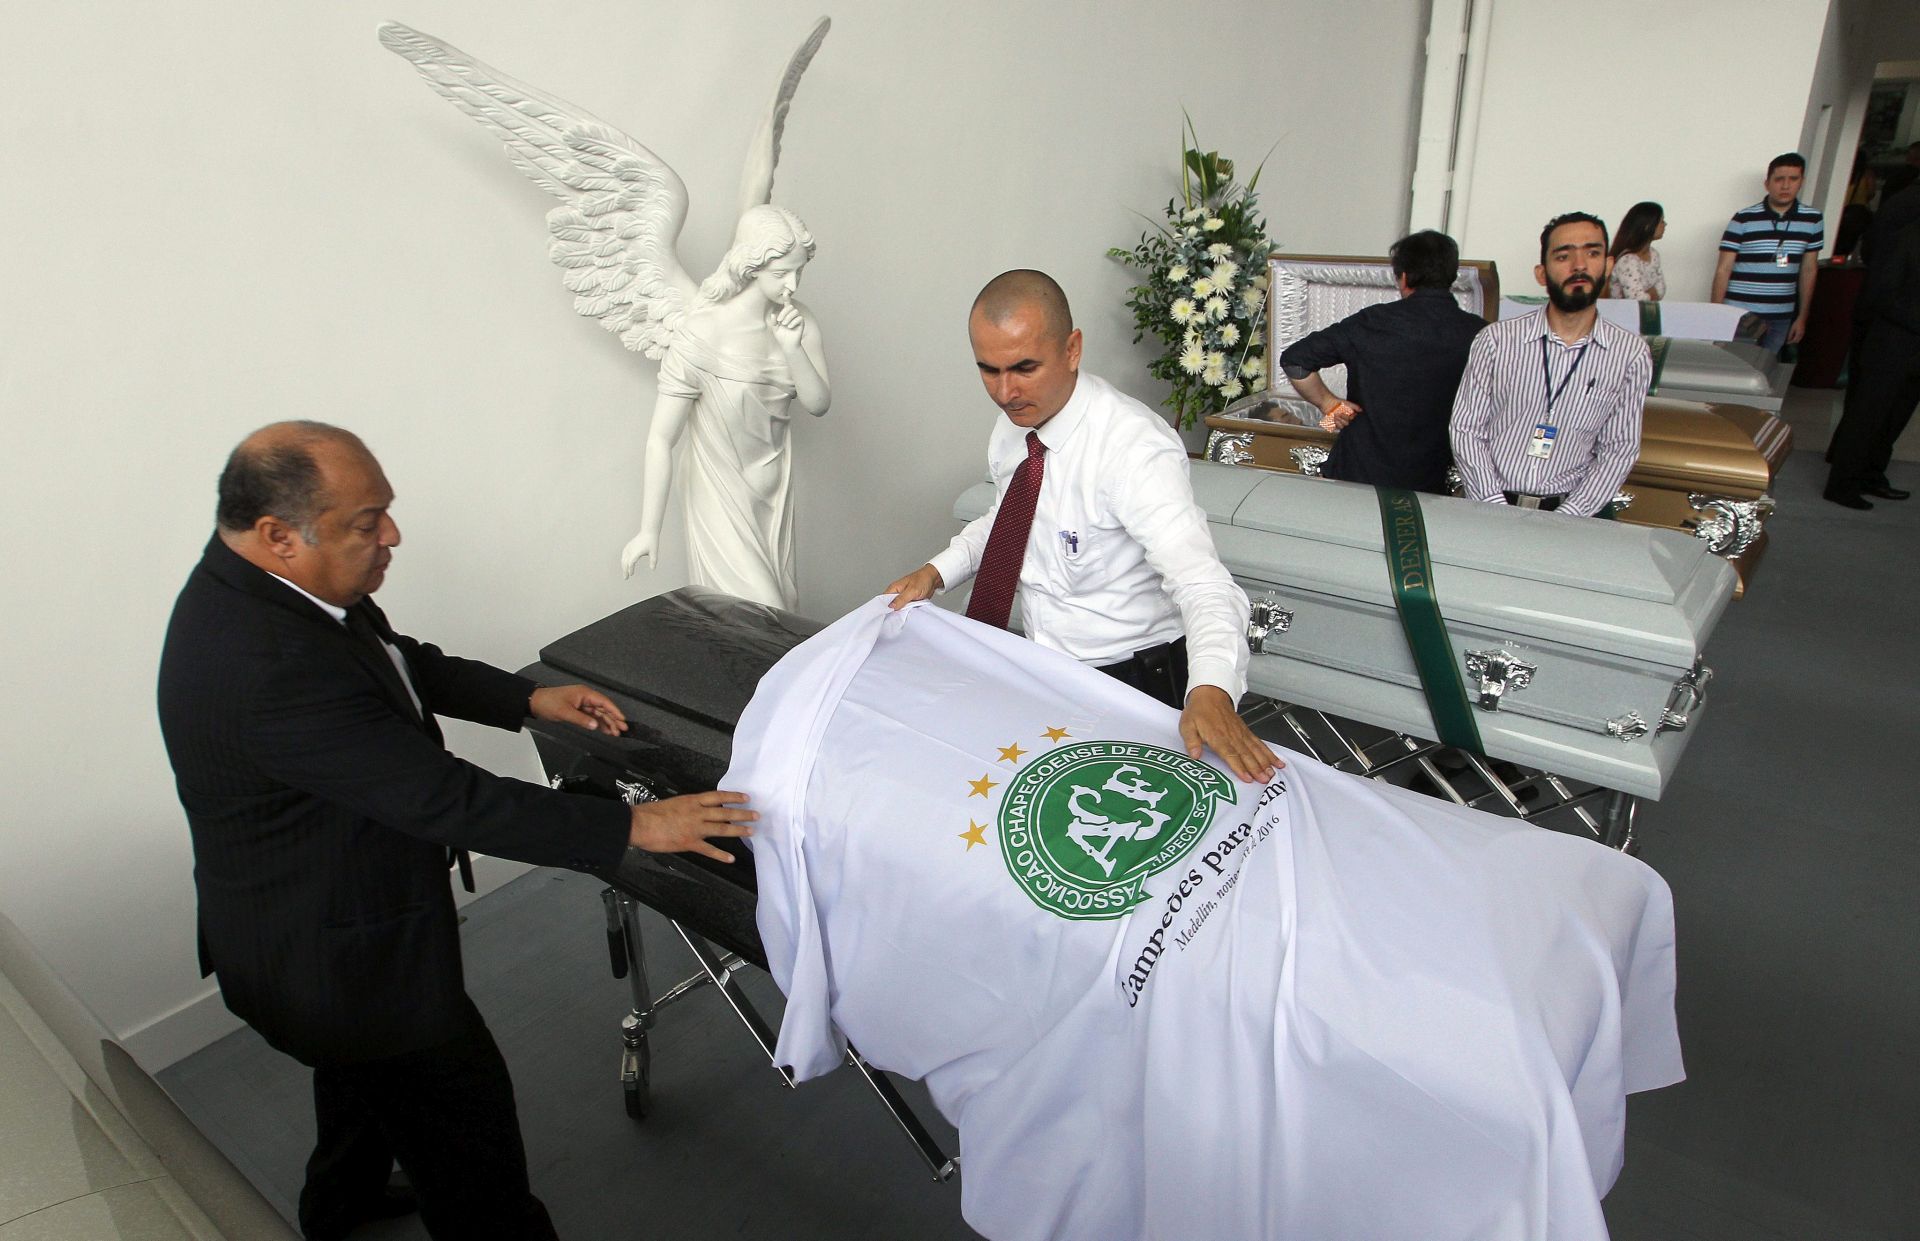 epa05655573 Workers place the Chapecoense soccer team flags at San Vicente funeral home on some of the victims of the LaMia Bolivian airline accident, including the players of the Brazilian soccer team Chapecoense, in Medellin, Colombia, 01 December 2016. 71 people died when an aircraft crashed late 28 November 2016 with 77 people on board, including players and staff of the Brazilian soccer club Chapecoense. The plane crashed in a mountainous area outside Medellin, Colombia as it was approaching the Jose Maria Cordoba airport. Chapecoense were scheduled to play in the Copa Sudamericana final against Medellin's Atletico Nacional on 30 November 2016.  EPA/MAURICIO DUENAS CASTANEDA